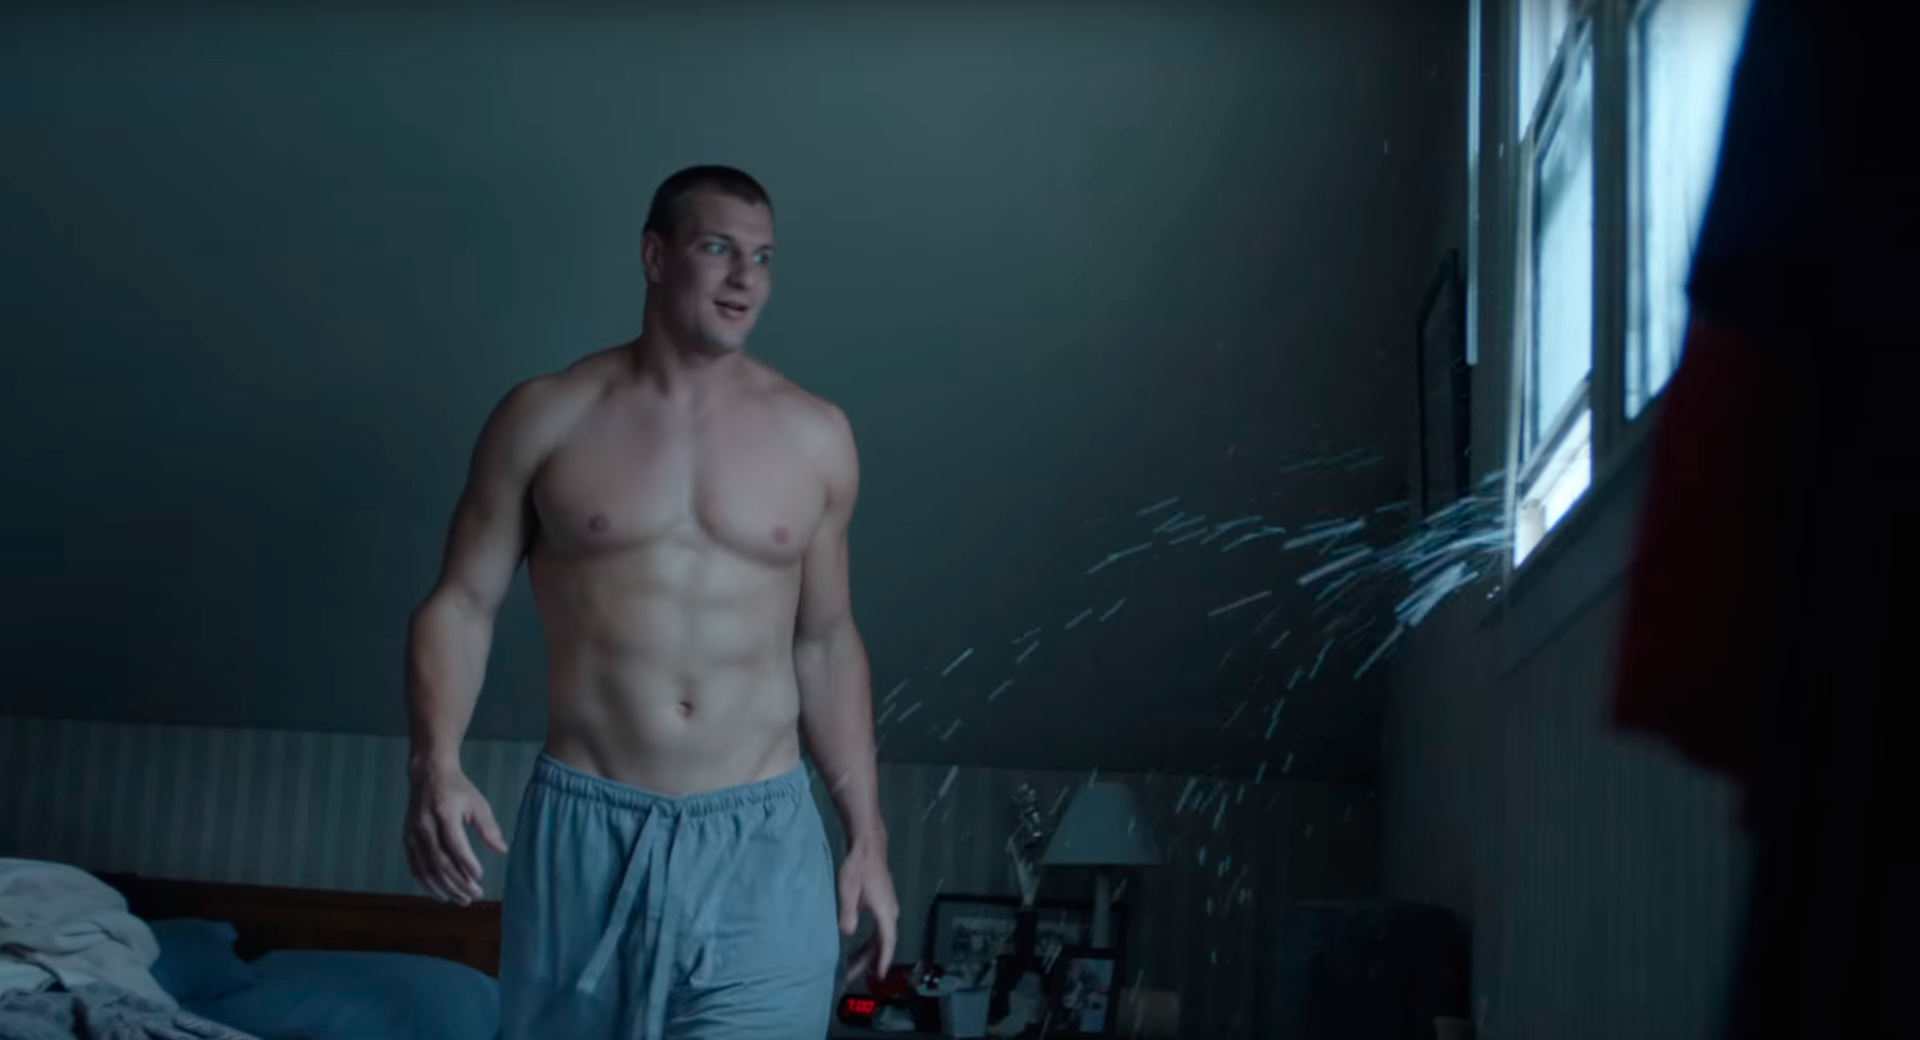 Gronk gets a snow day in Nike’s cool new ad